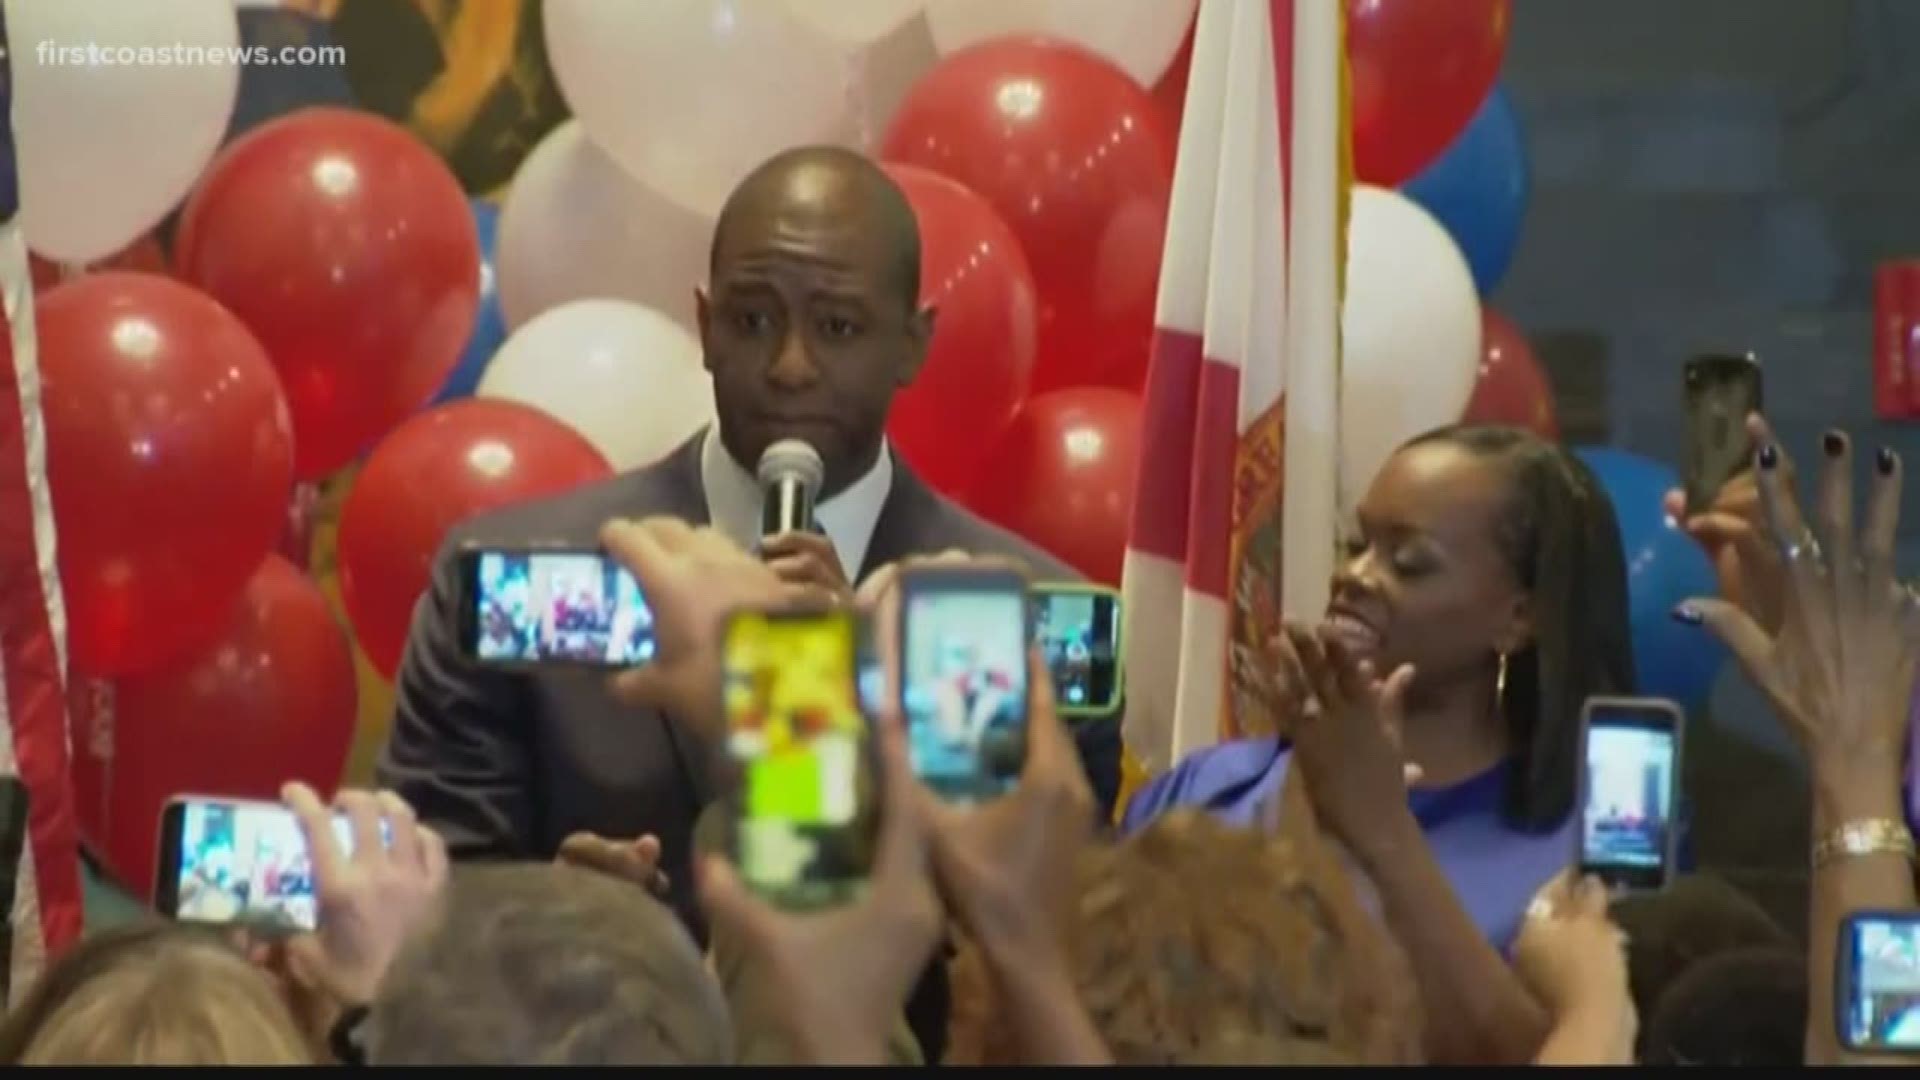 Former Tallahassee mayor Andrew Gillum's father died in Jacksonville, according to an announcement from the Gillum family on Saturday night. He was 69 years old.